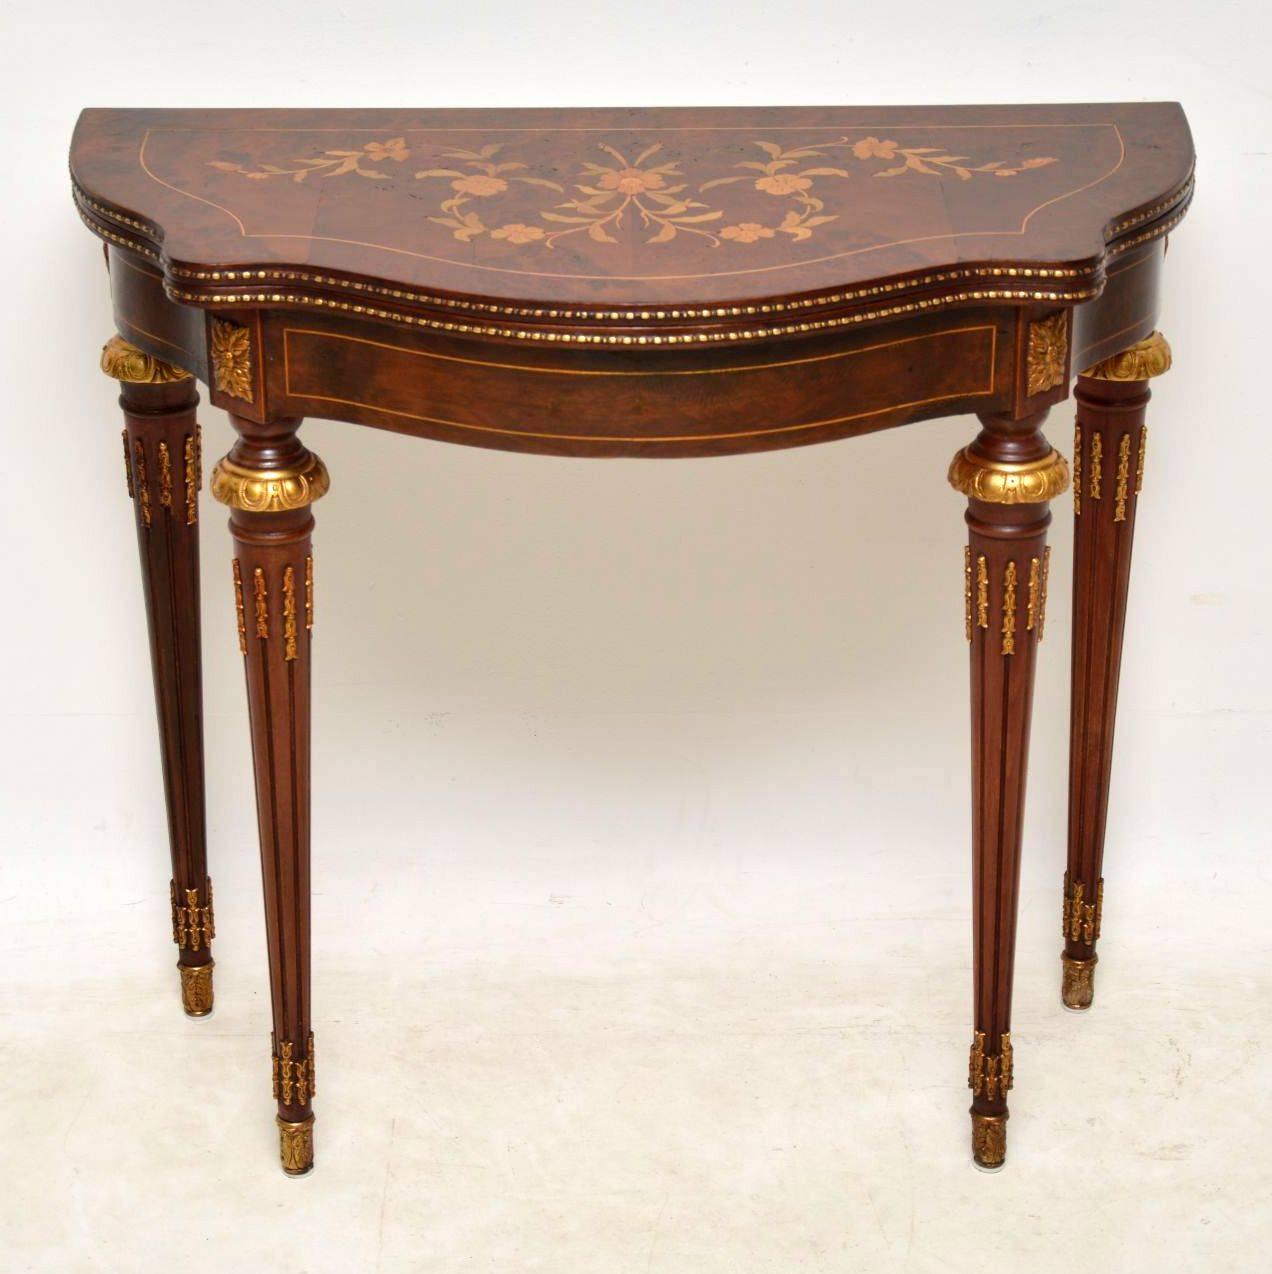 Antique French style walnut card table with a serpentine shaped front and lovely decoration. It dates from circa 1950s period and is in good condition. The top is burr walnut and has a very detailed and colorful floral marquetry made up from many